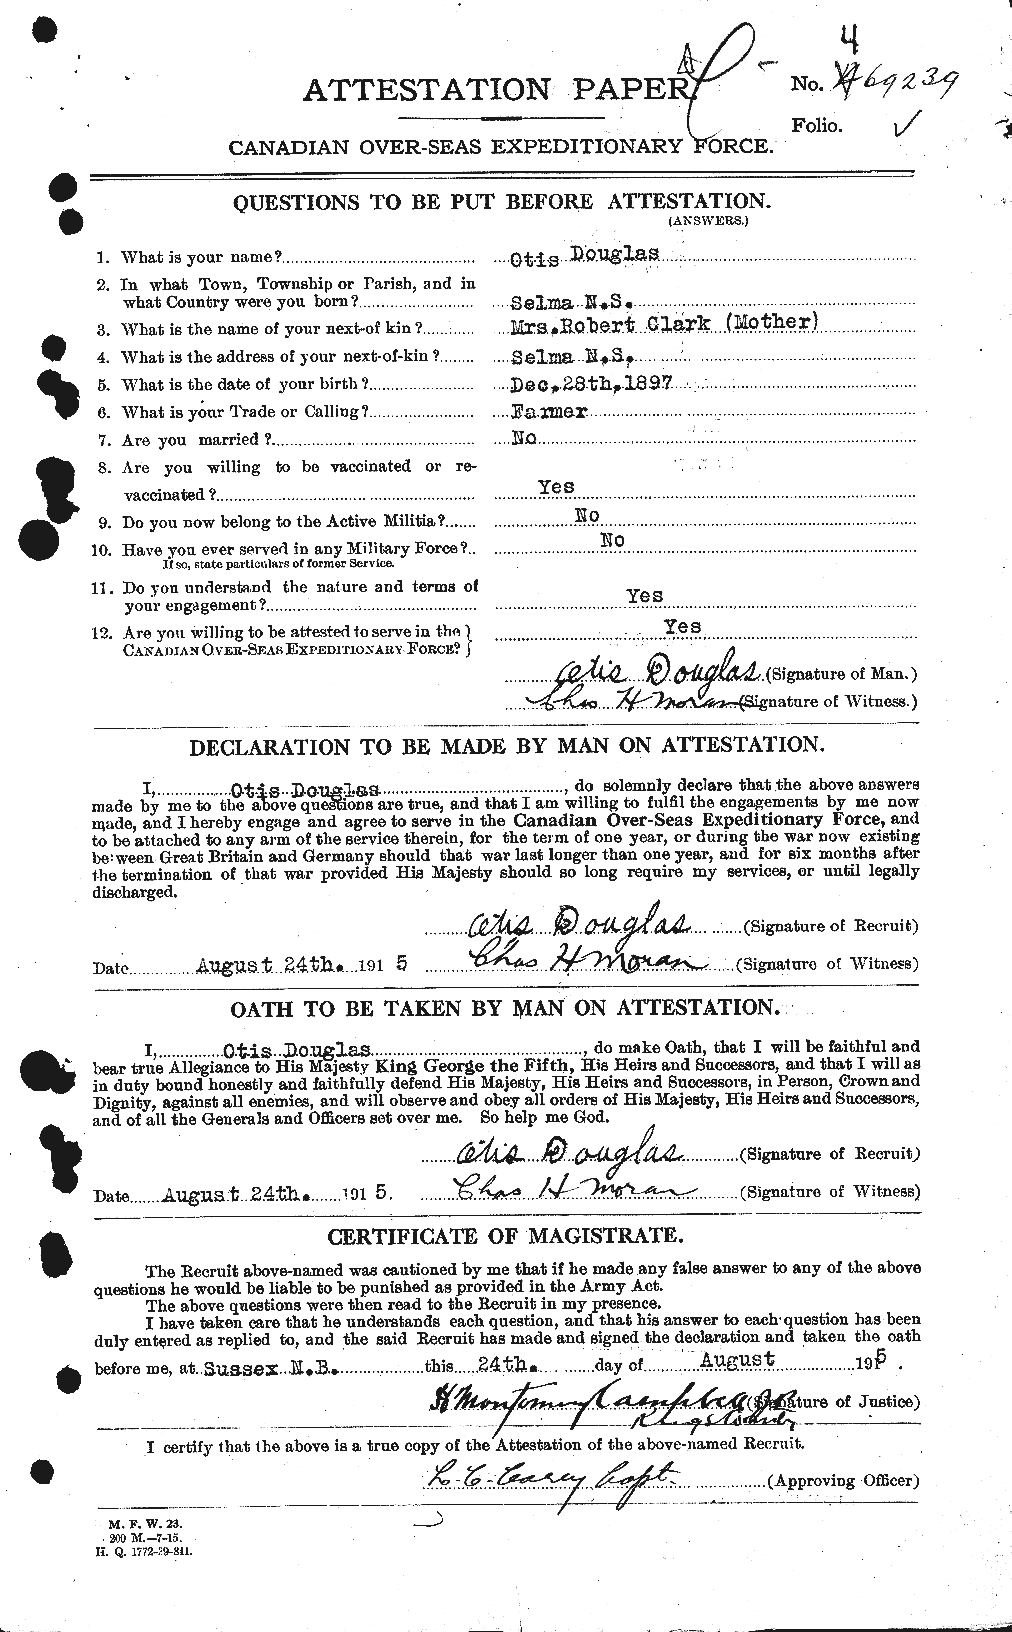 Personnel Records of the First World War - CEF 297819a